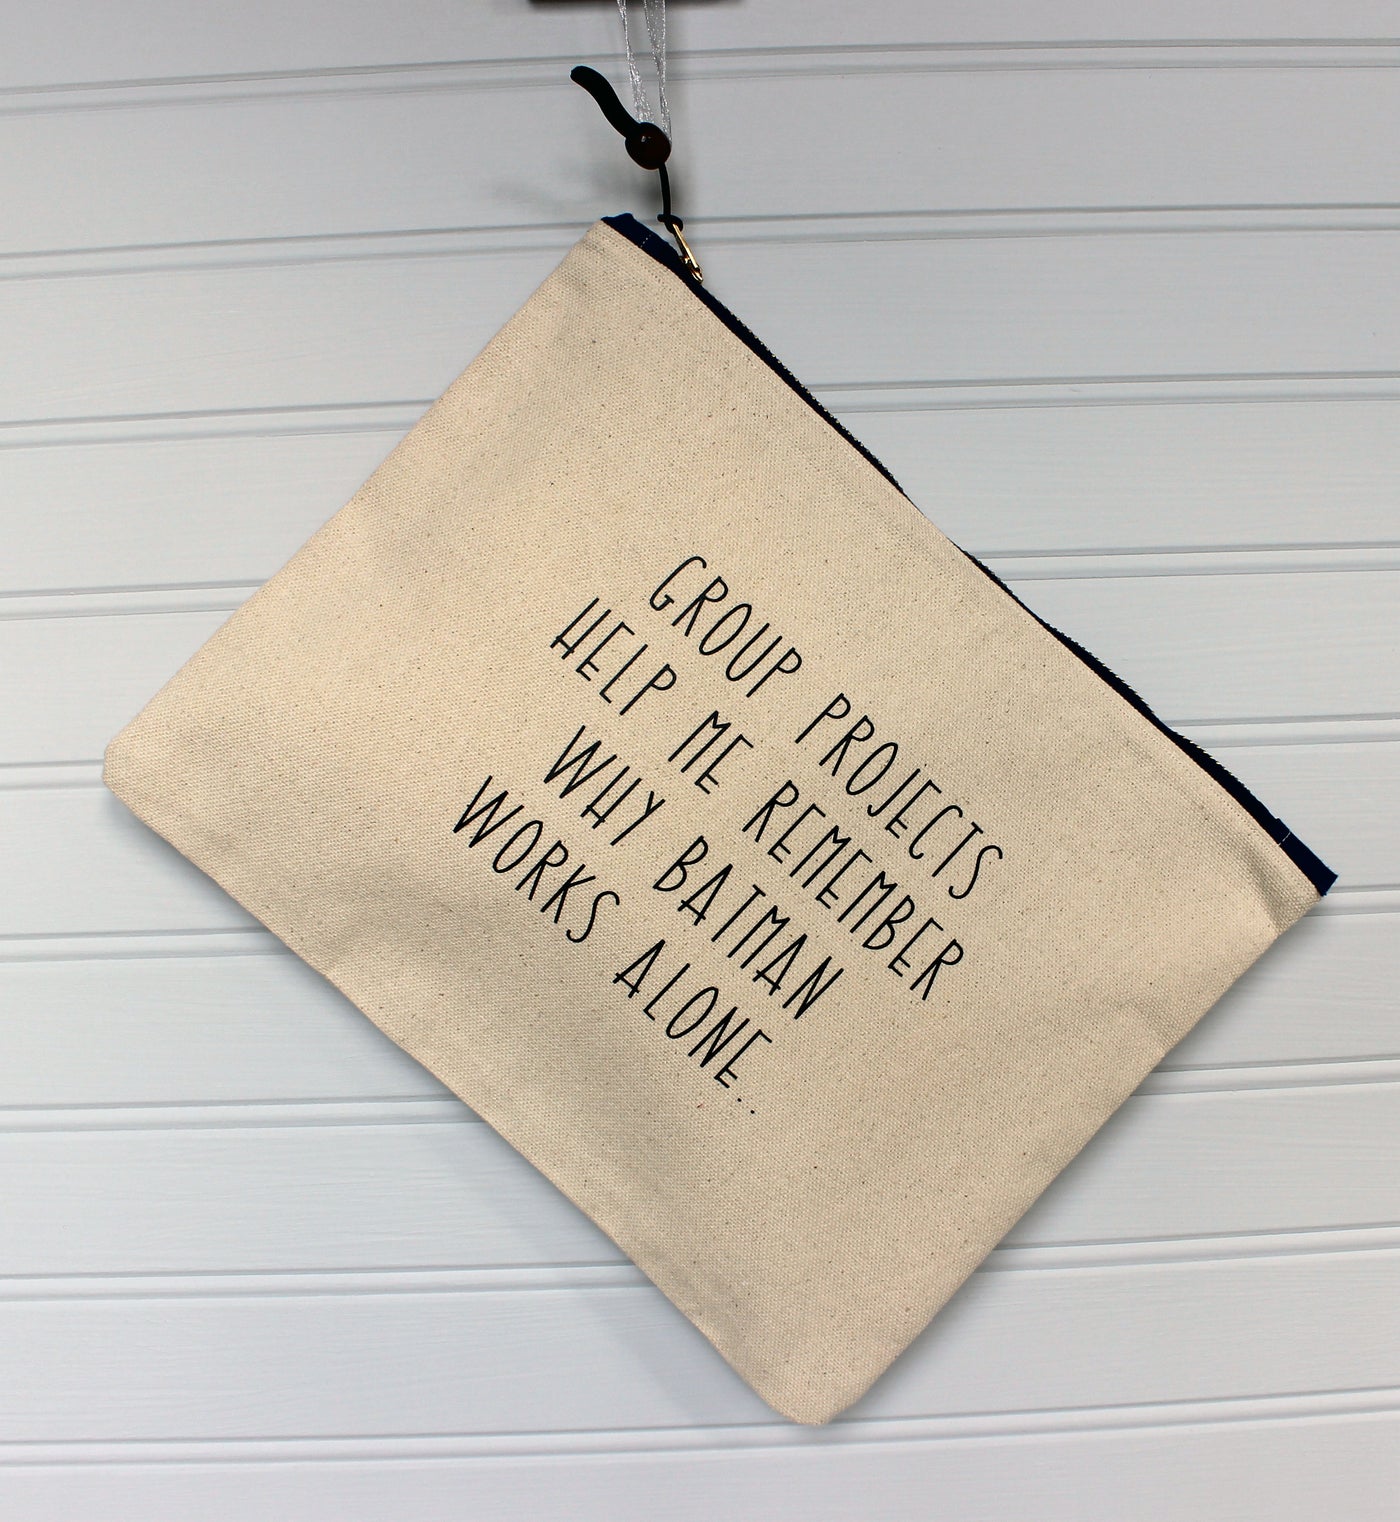 group projects - canvas zip bag - Pretty Clever Words